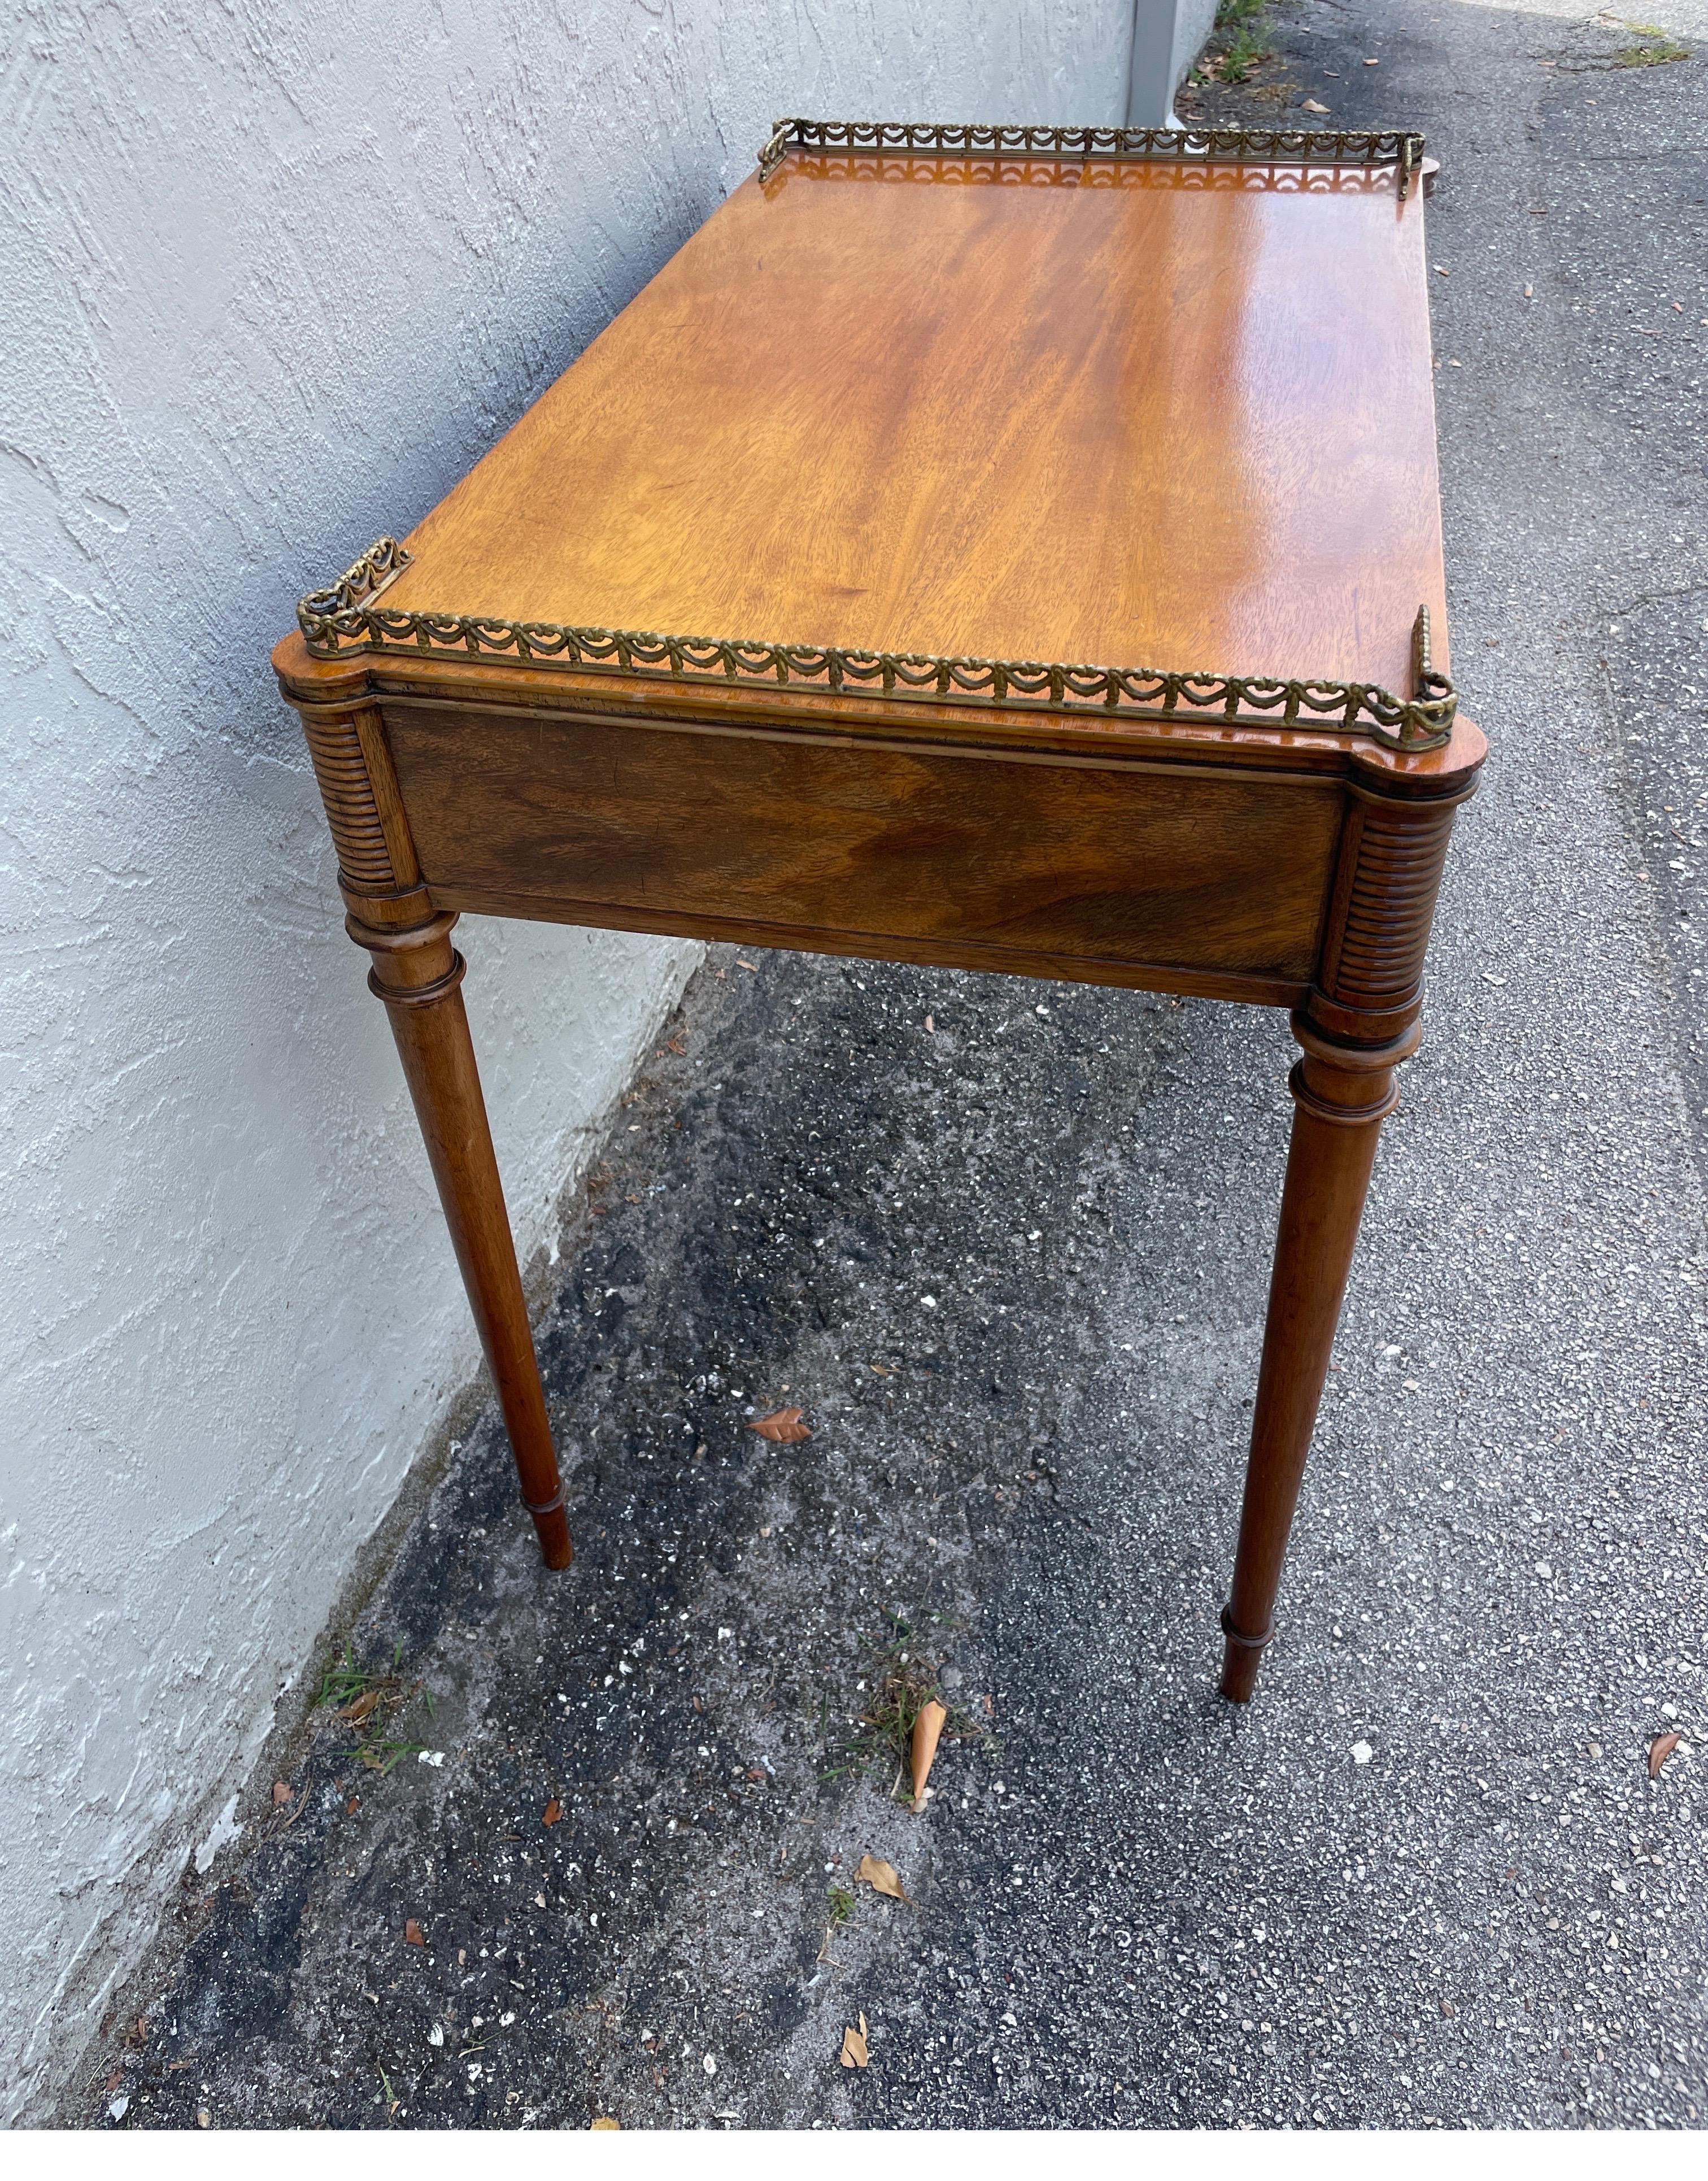 Vintage Regency Style Galleried Partners Desk / Server with Turret Corners In Good Condition For Sale In West Palm Beach, FL